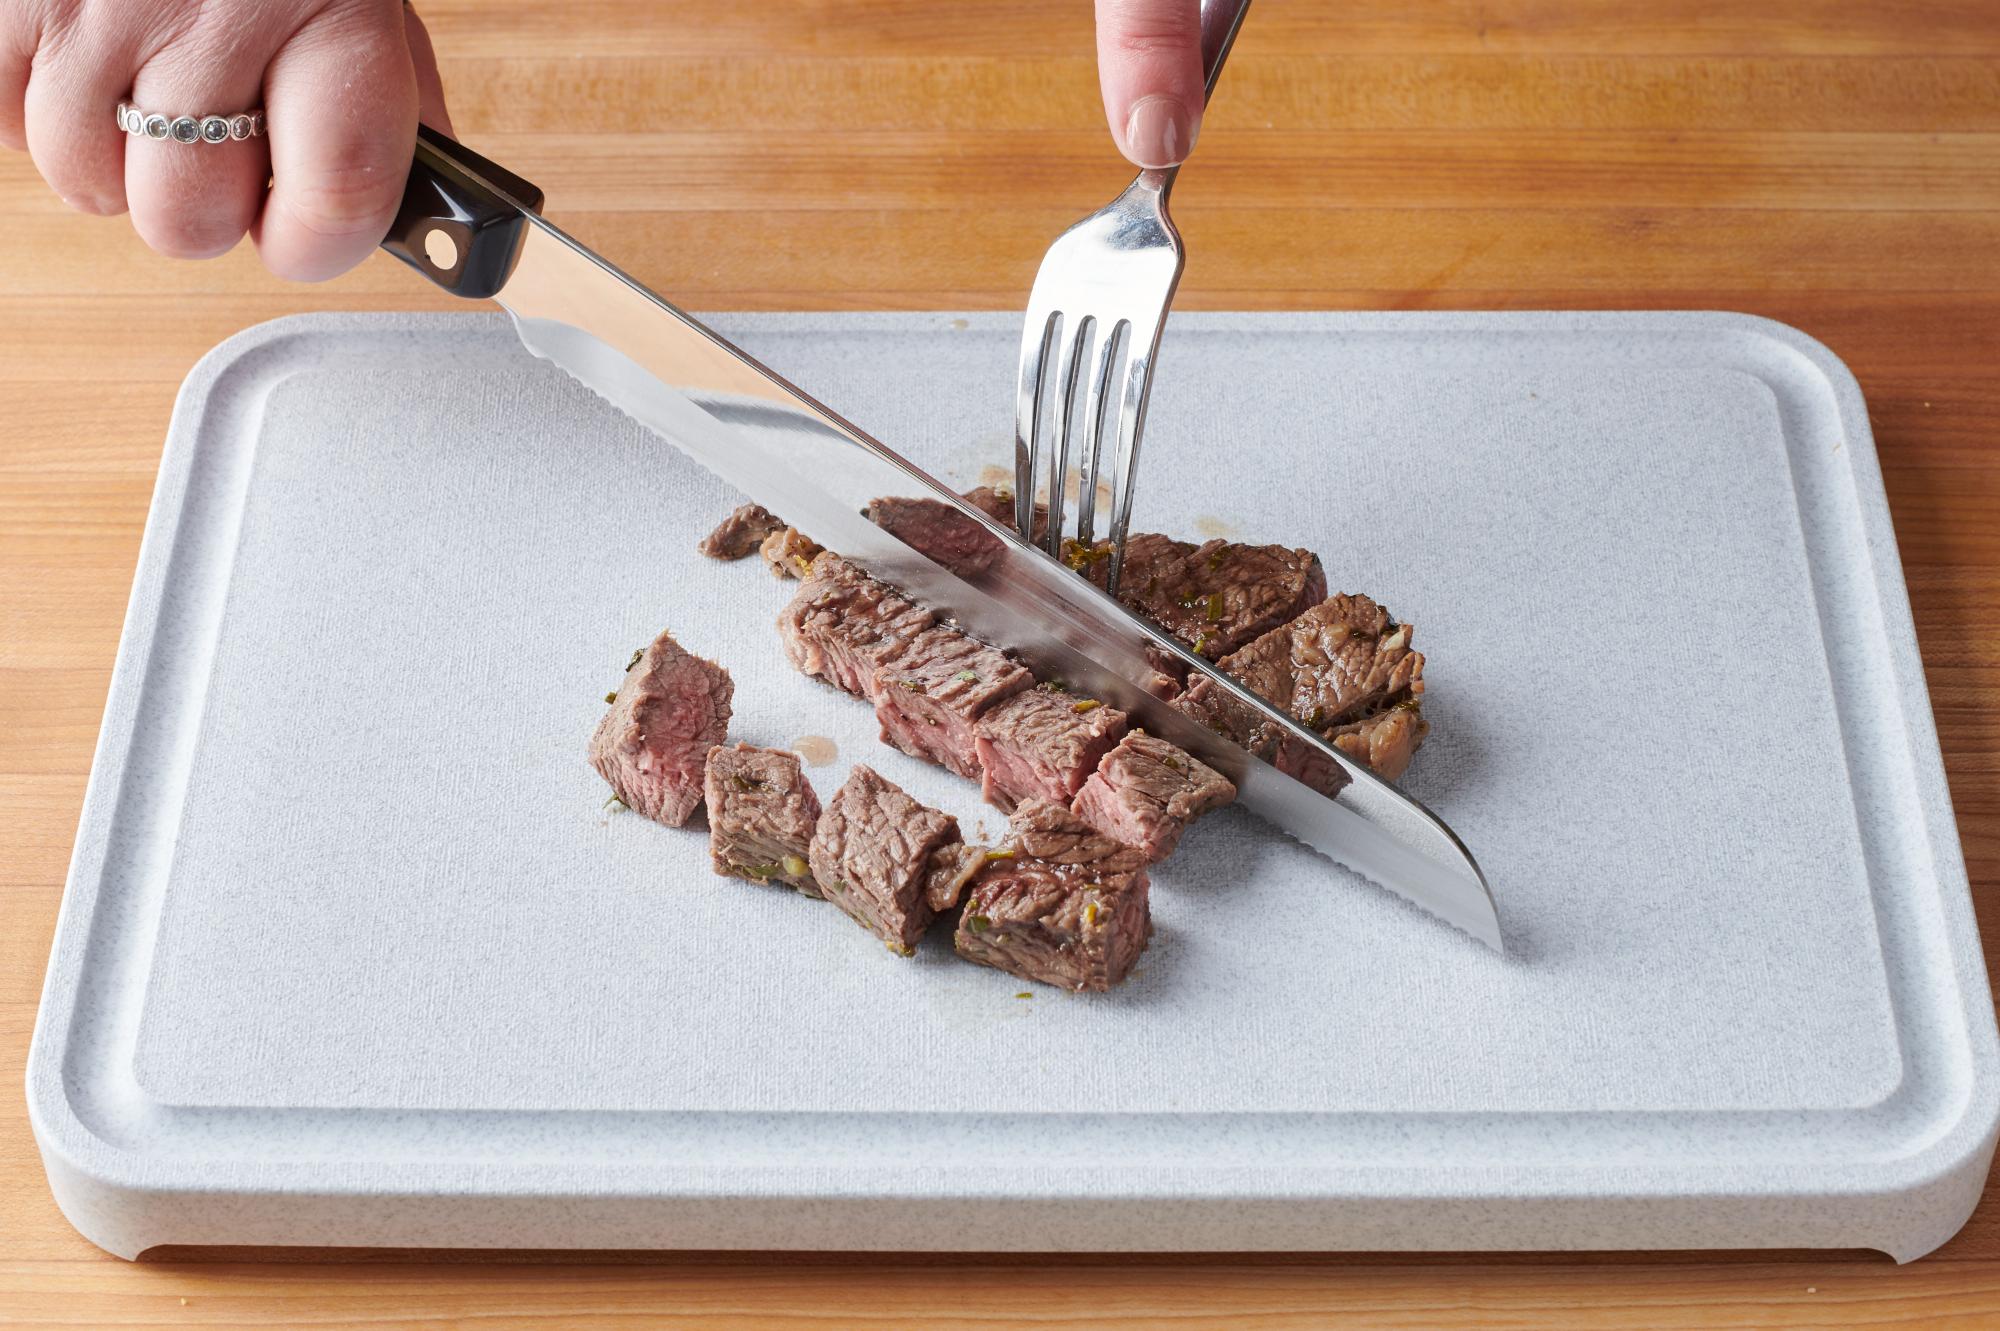 Slicing the steak with a Santoku-Style 8 inch Carving